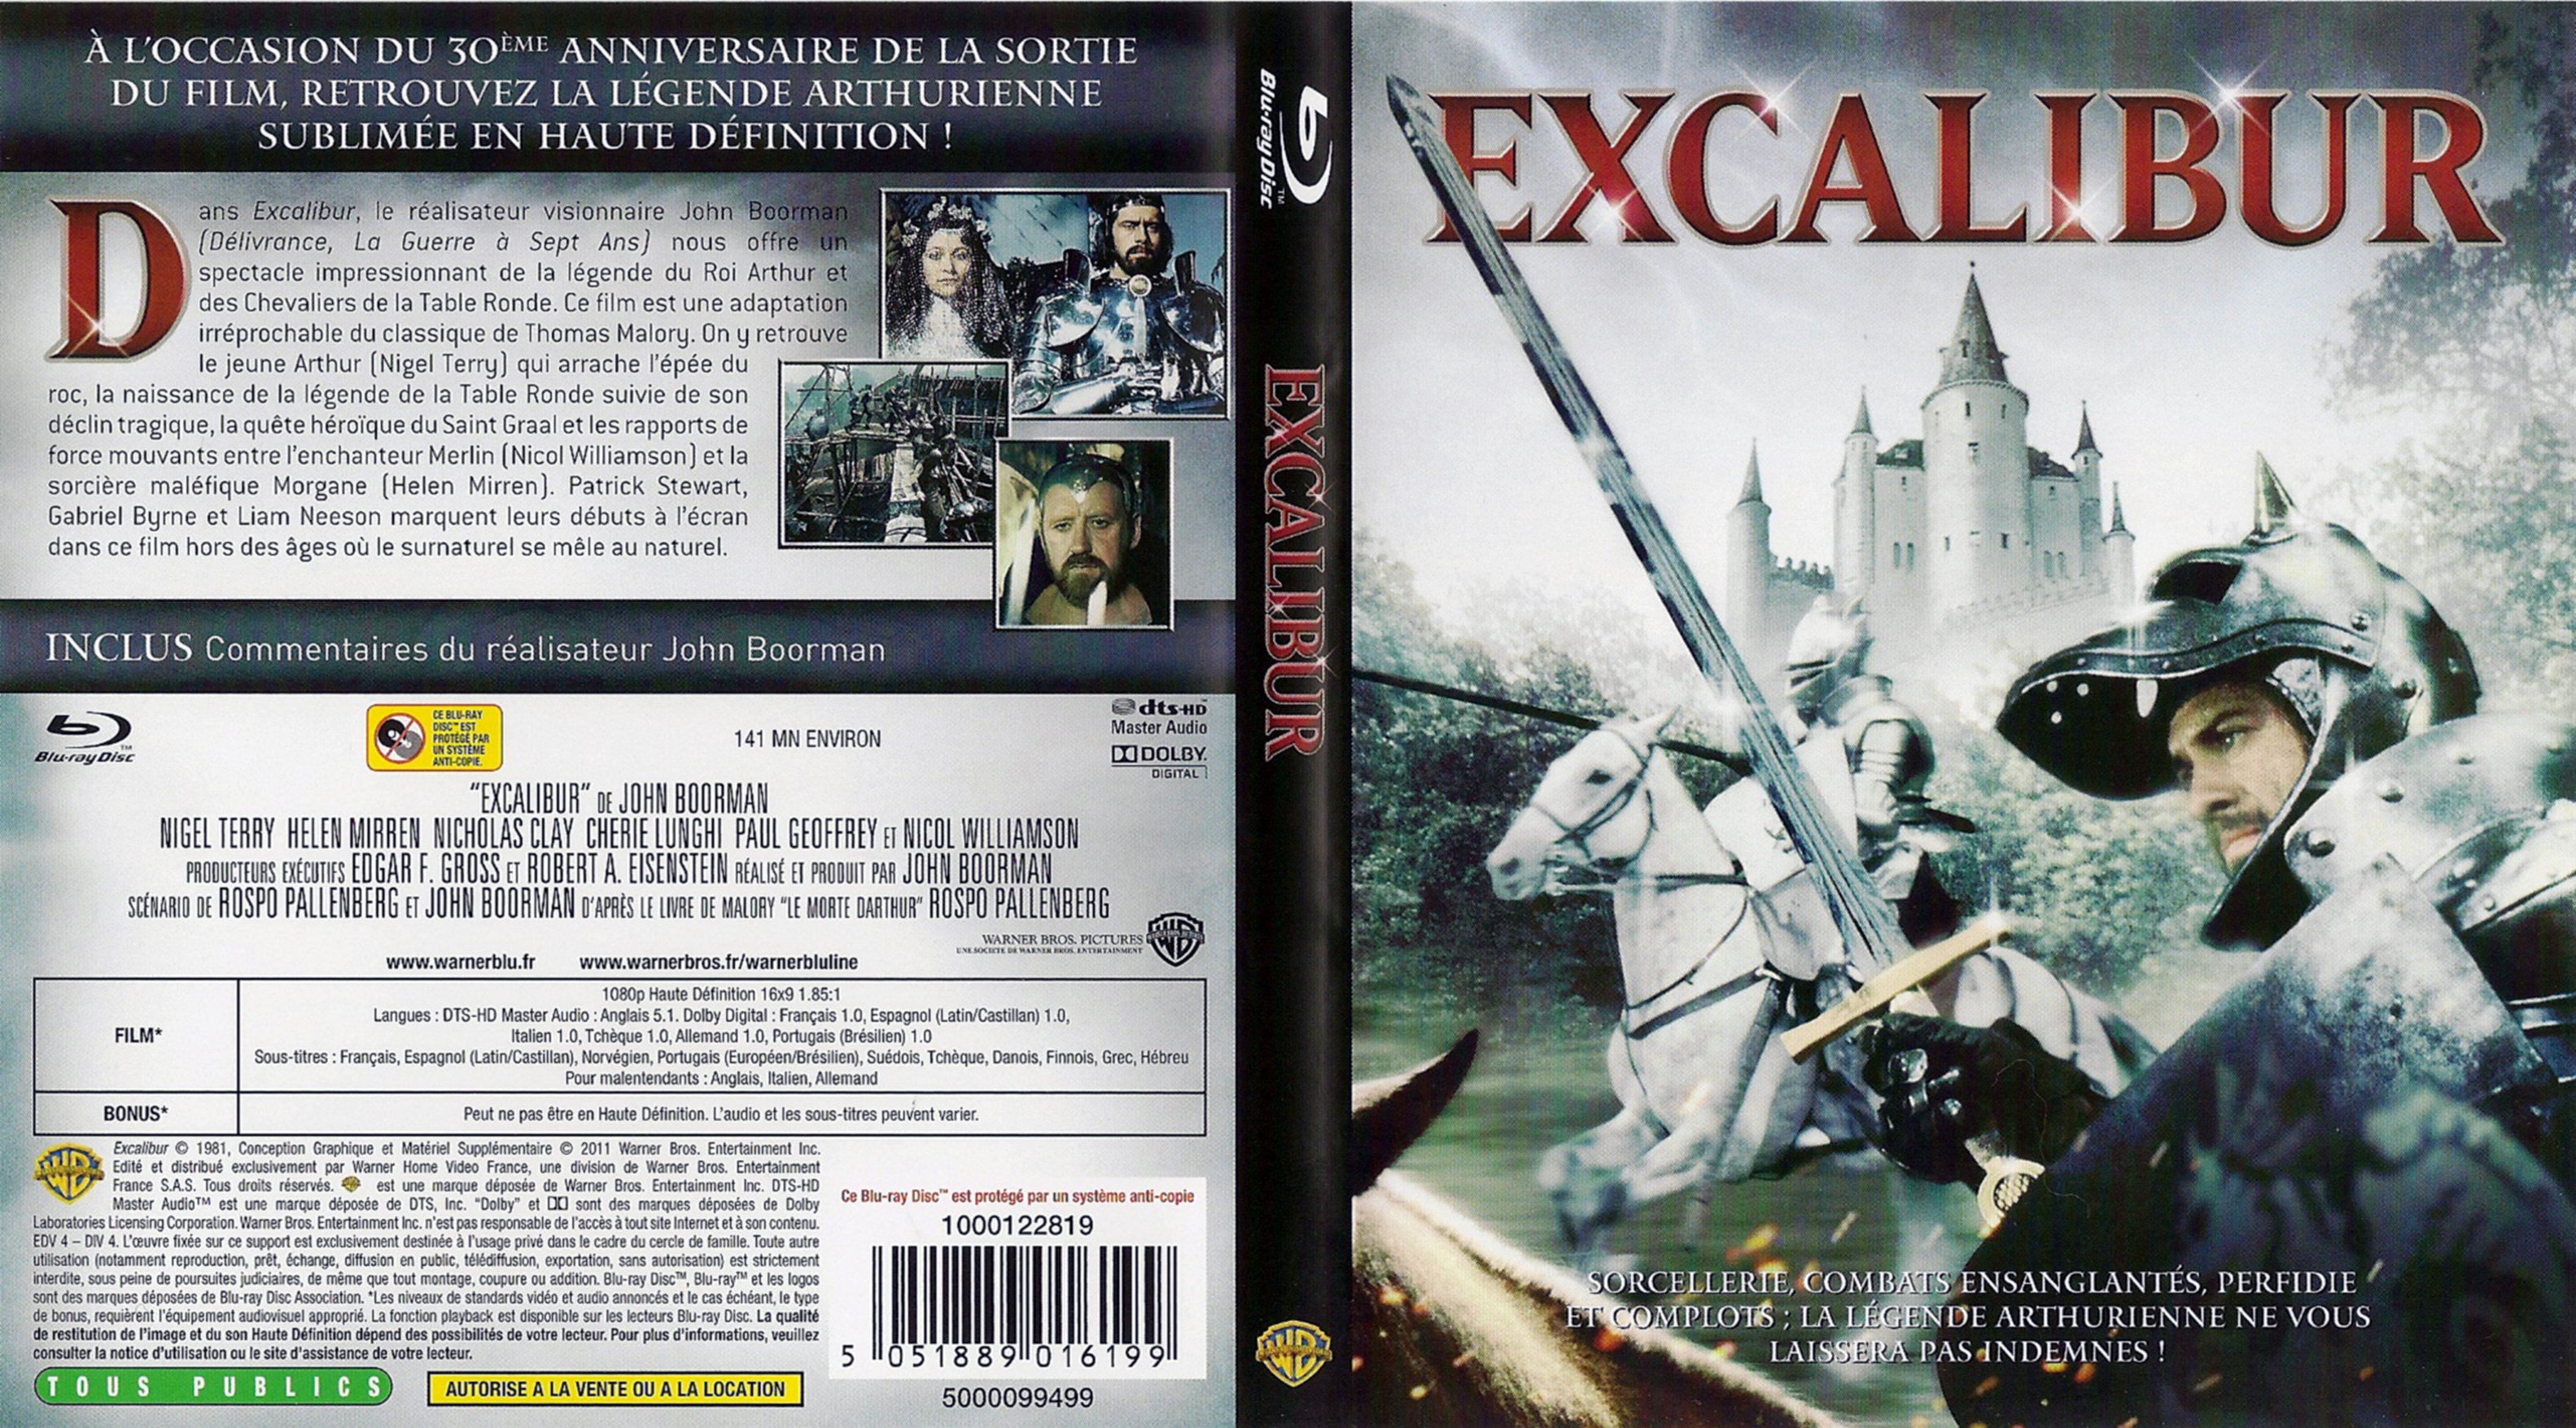 Jaquette DVD Excalibur (BLU-RAY)